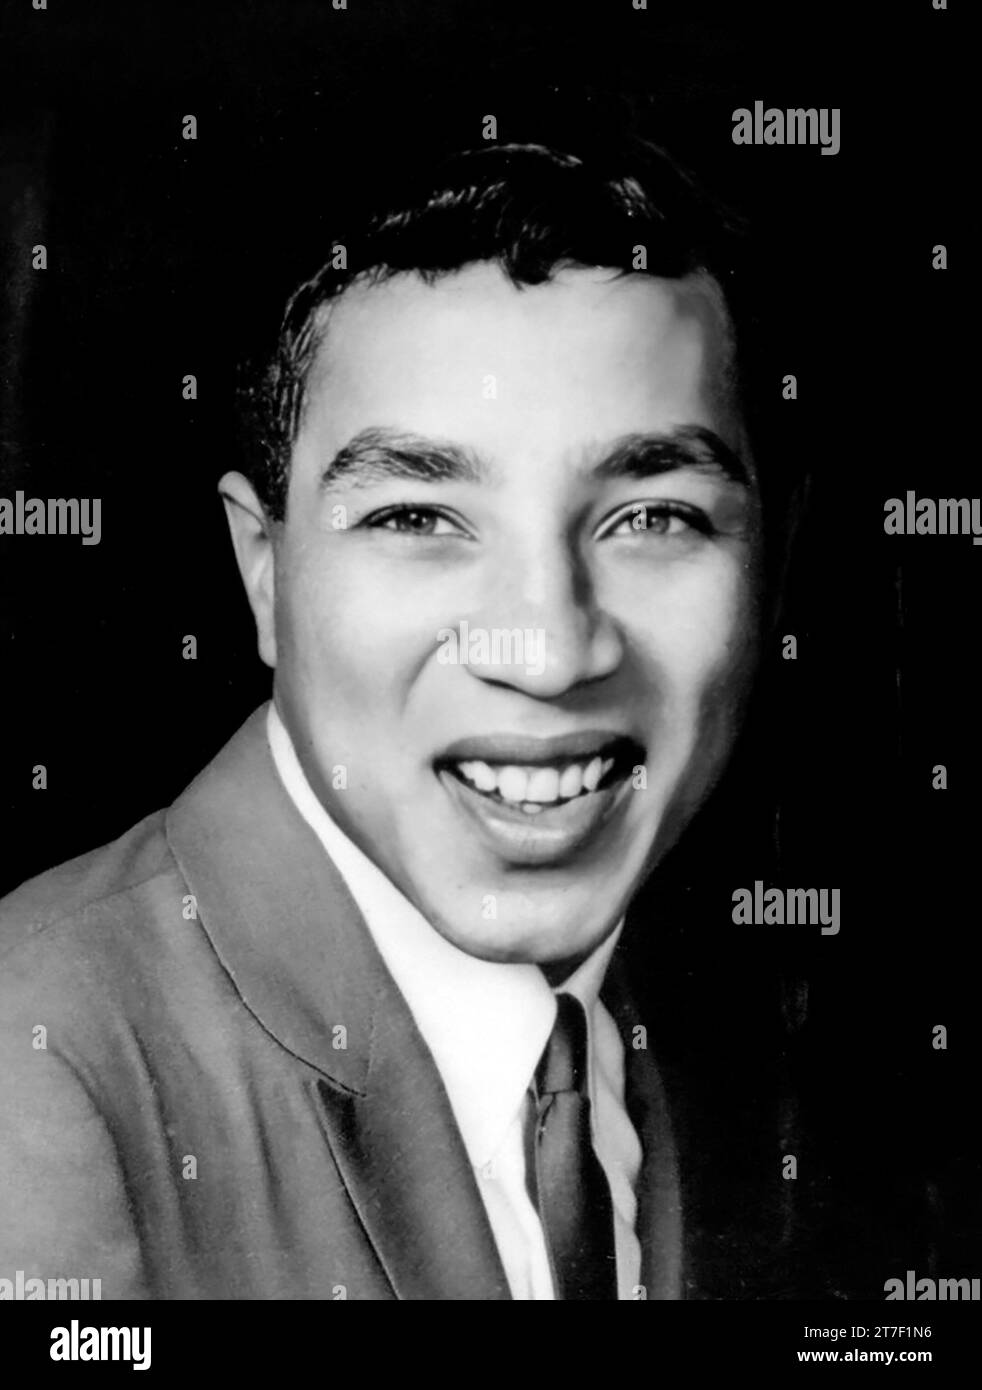 Smokey Robinson. Portrait of the American singer, William 'Smokey' Robinson Jr. (b. 1940) when he was a member of The Miracles, publicity photo, c. 1962 Stock Photo